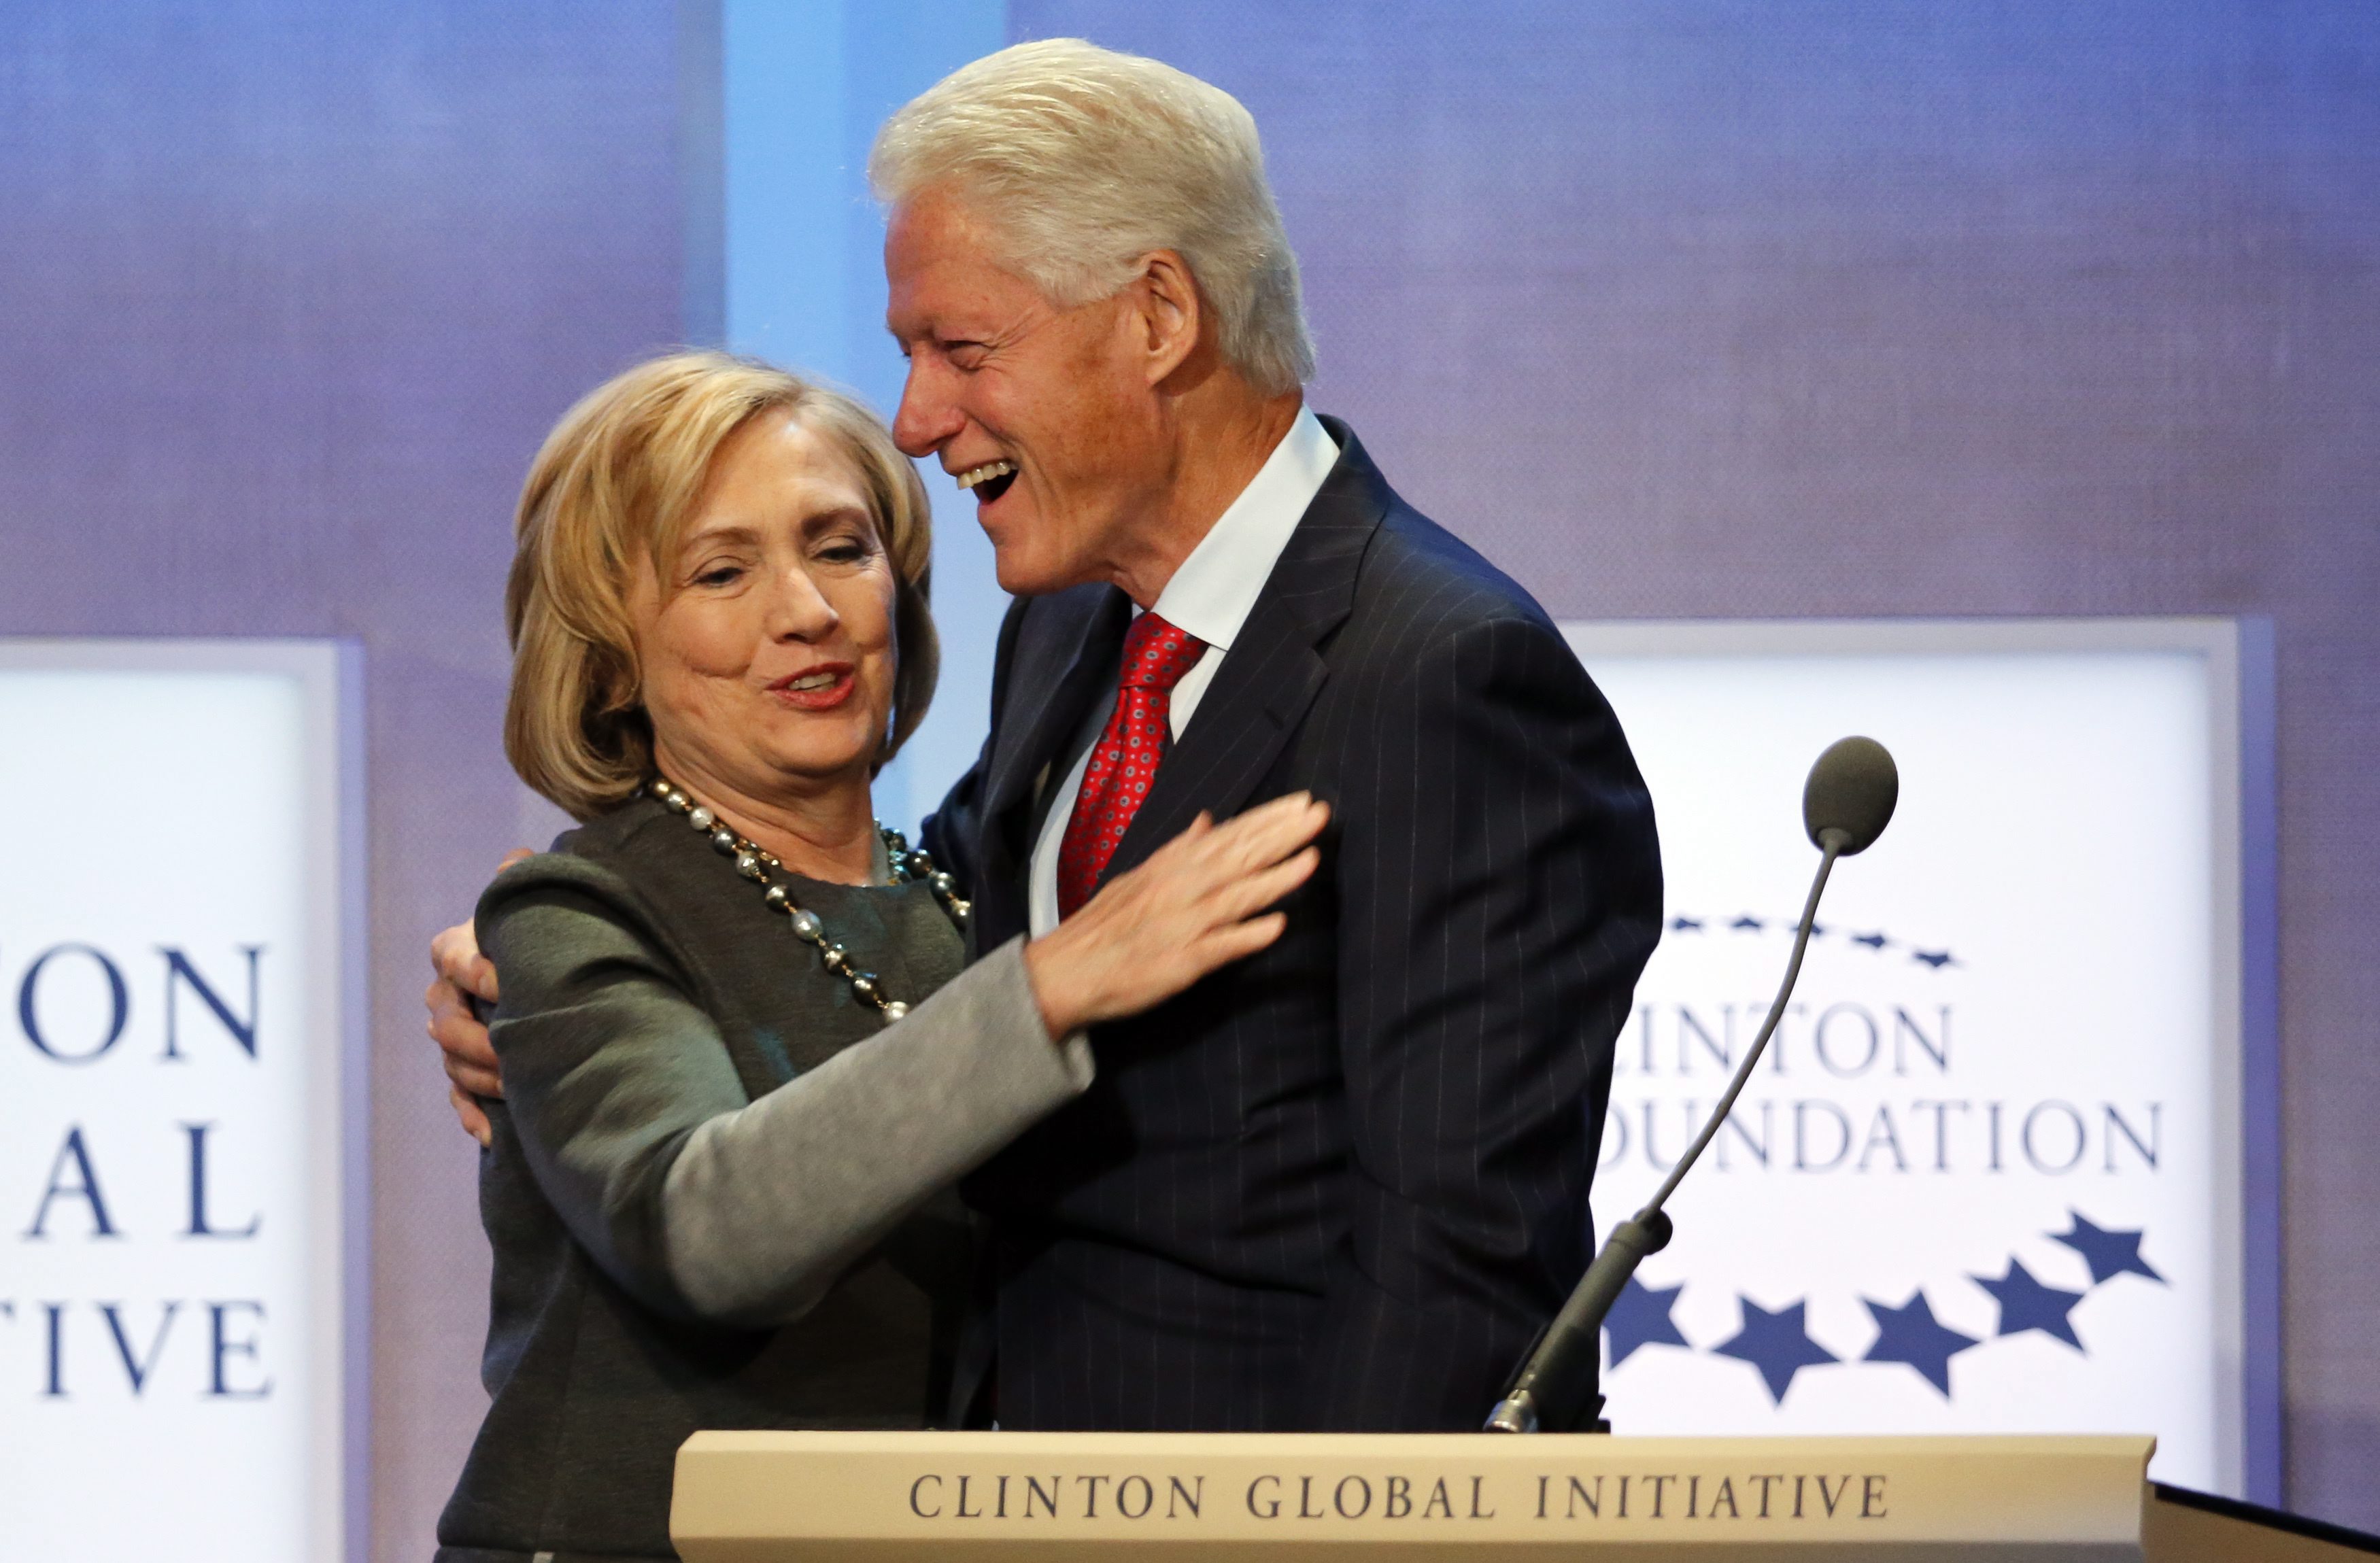 2014-09-22 12:26:39 epa04412408 Former US President Bill Clinton greets his wife former US Secretary of State Hillary Rodham Clinton (L) at the Clinton Global Initiative in New York, USA, 22 September 2014. EPA/RAY STUBBLEBINE